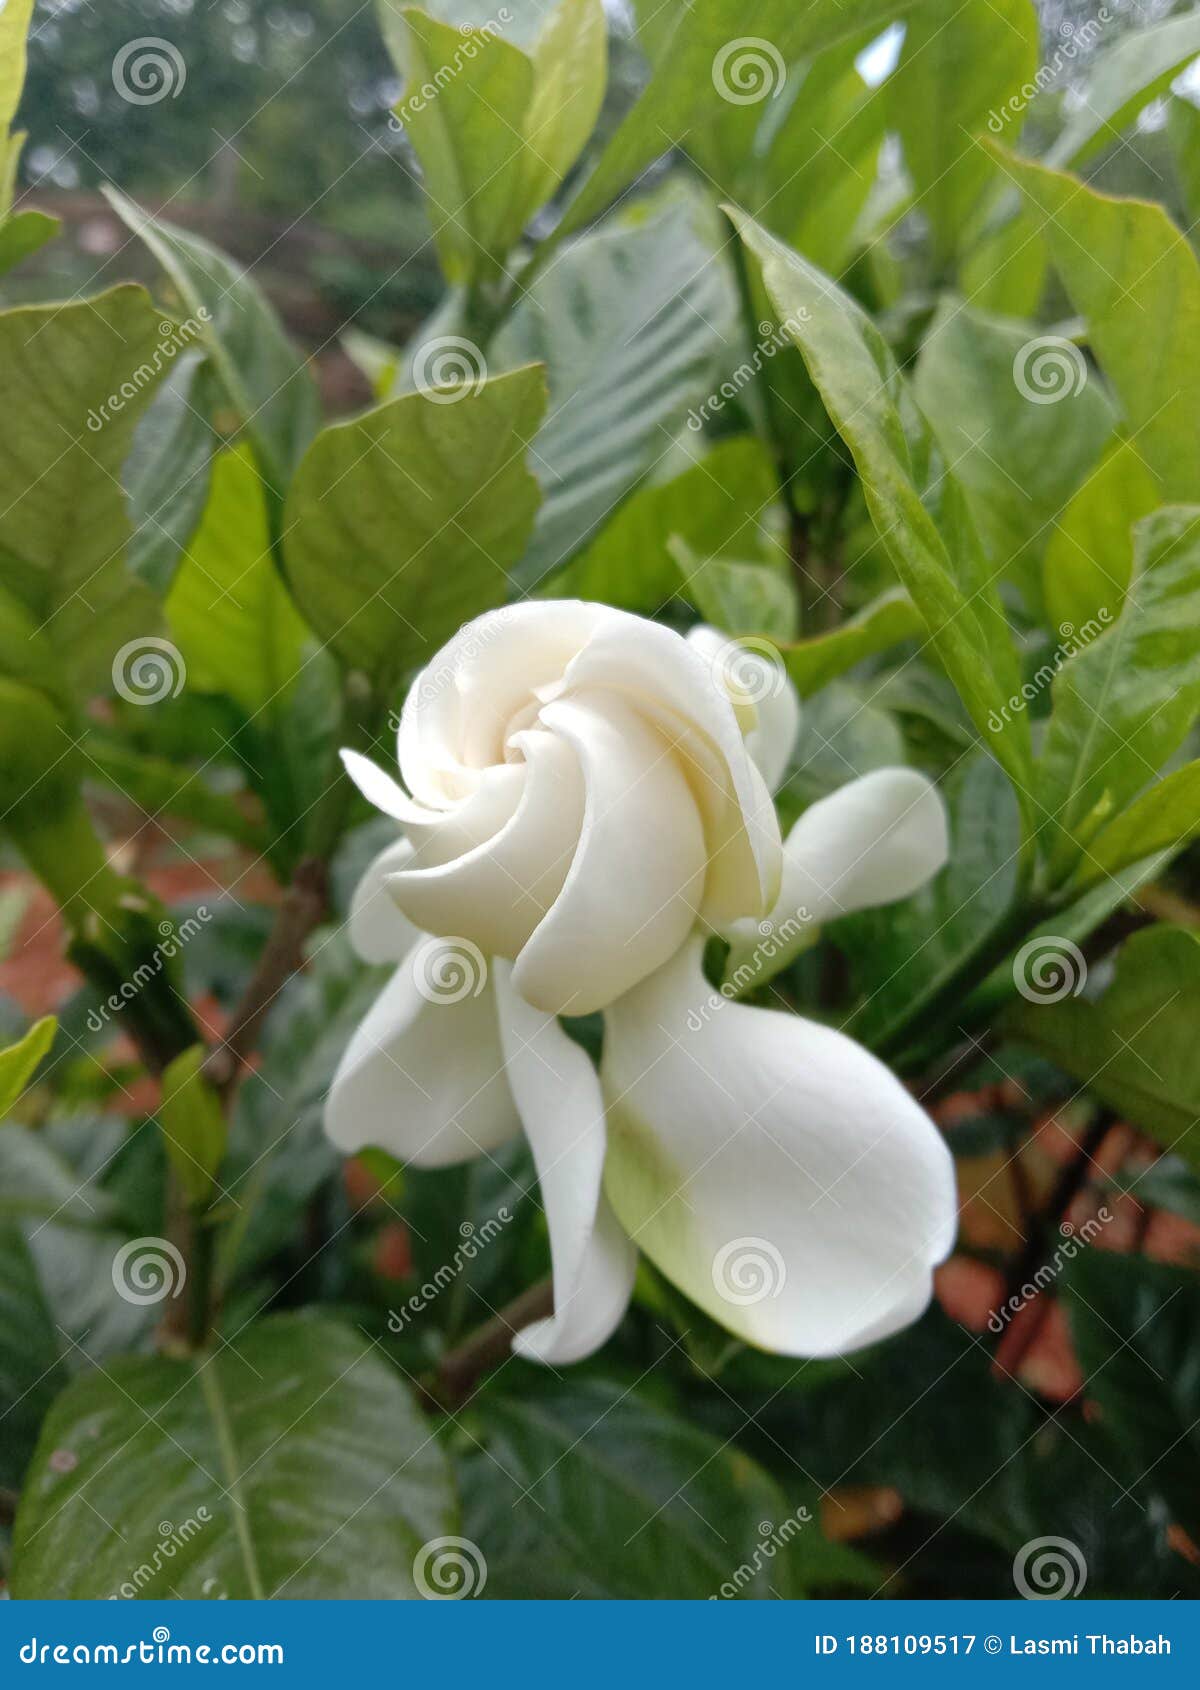 Gardenia Flower Ready To Bloom Widely Stock Image - Image of month, june:  188109517